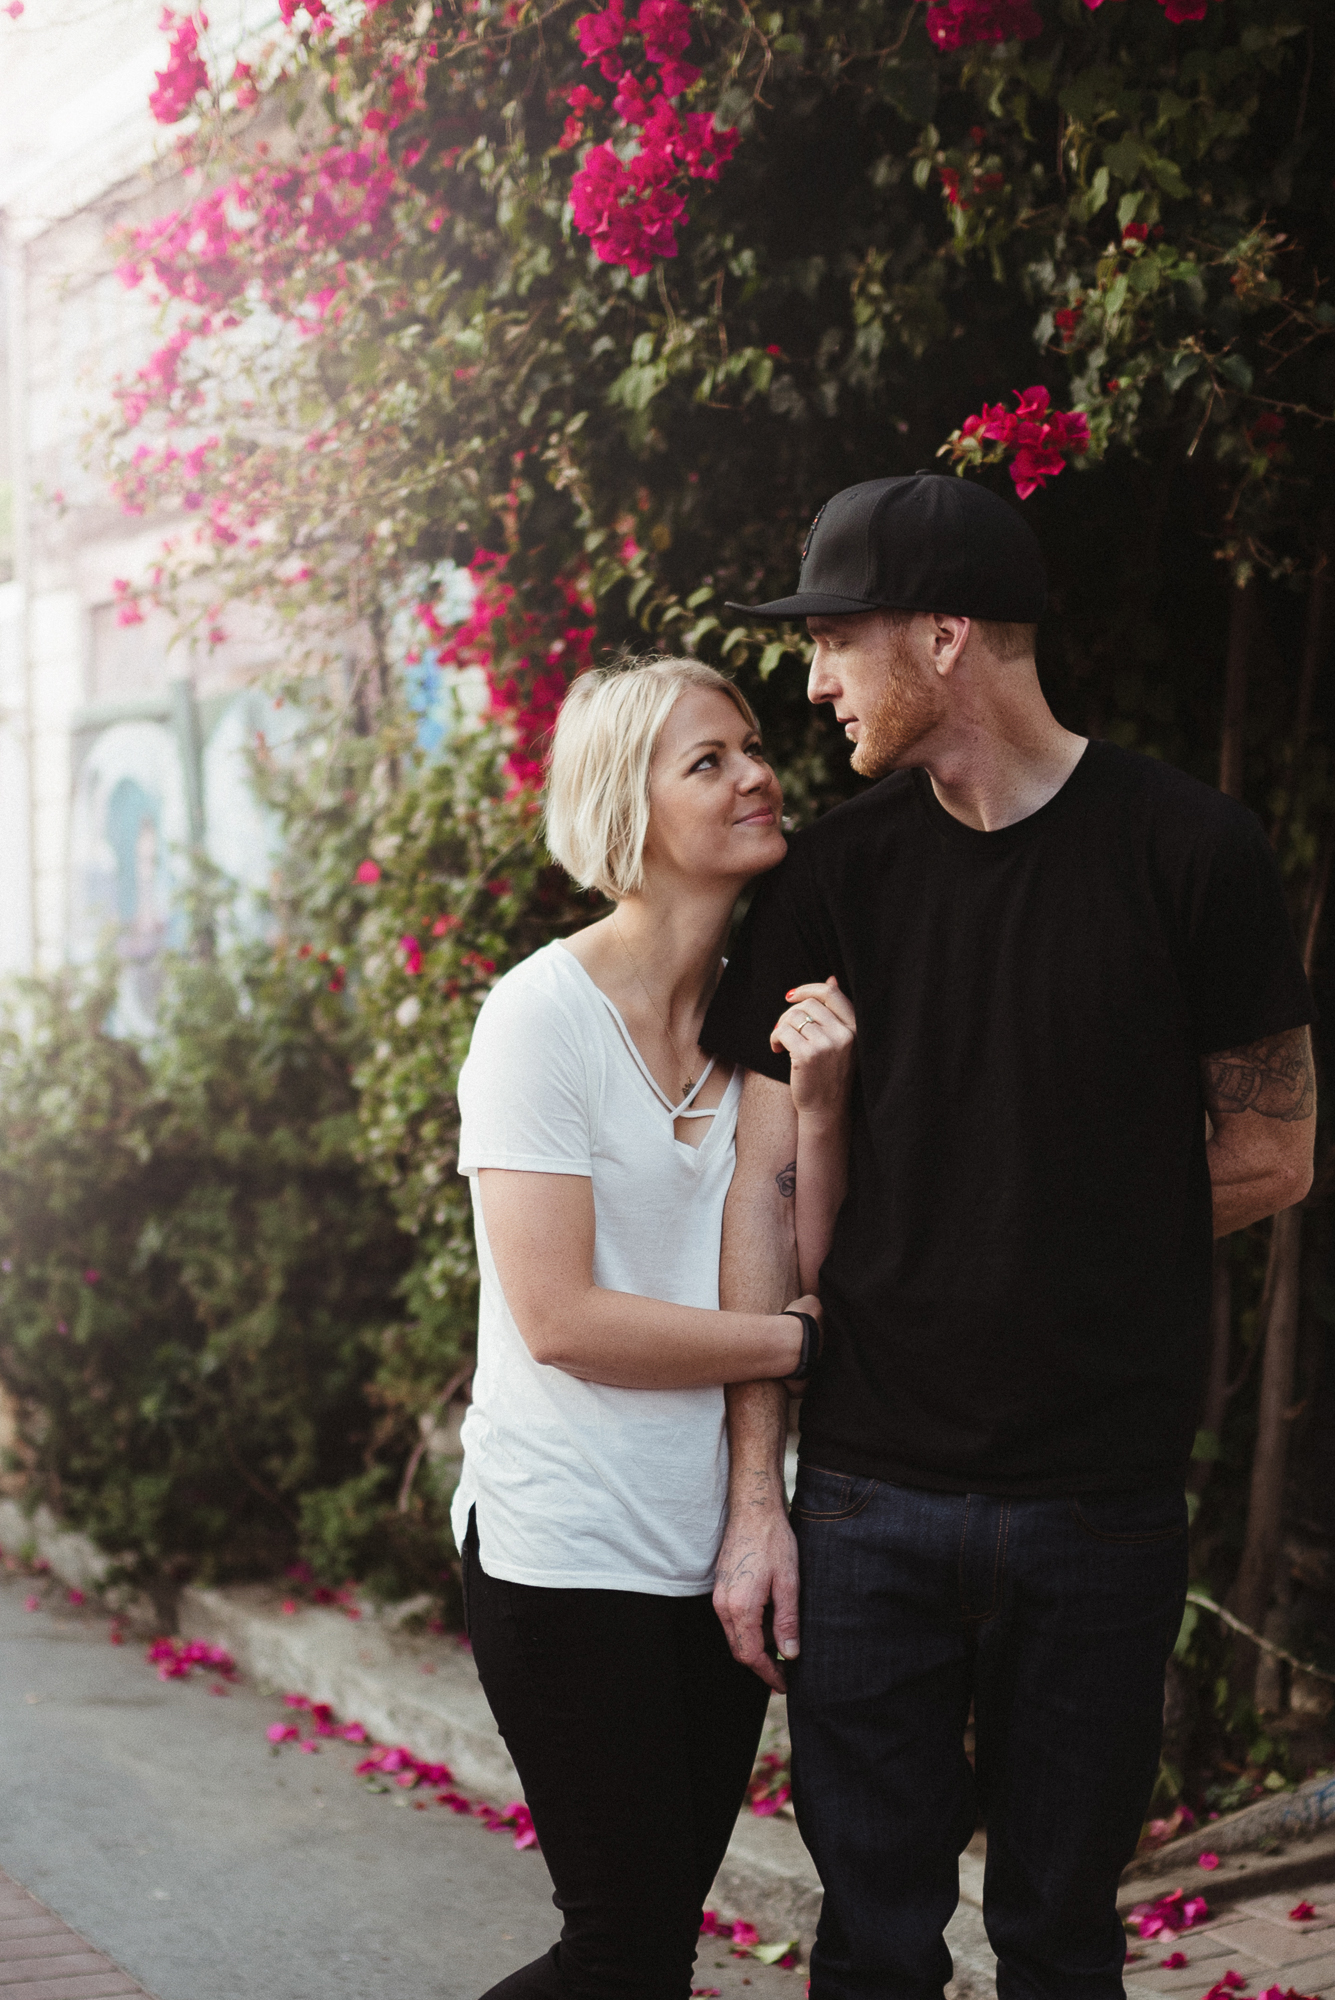 Romantic Portrait Session in front of Pink Flowers in San Franci